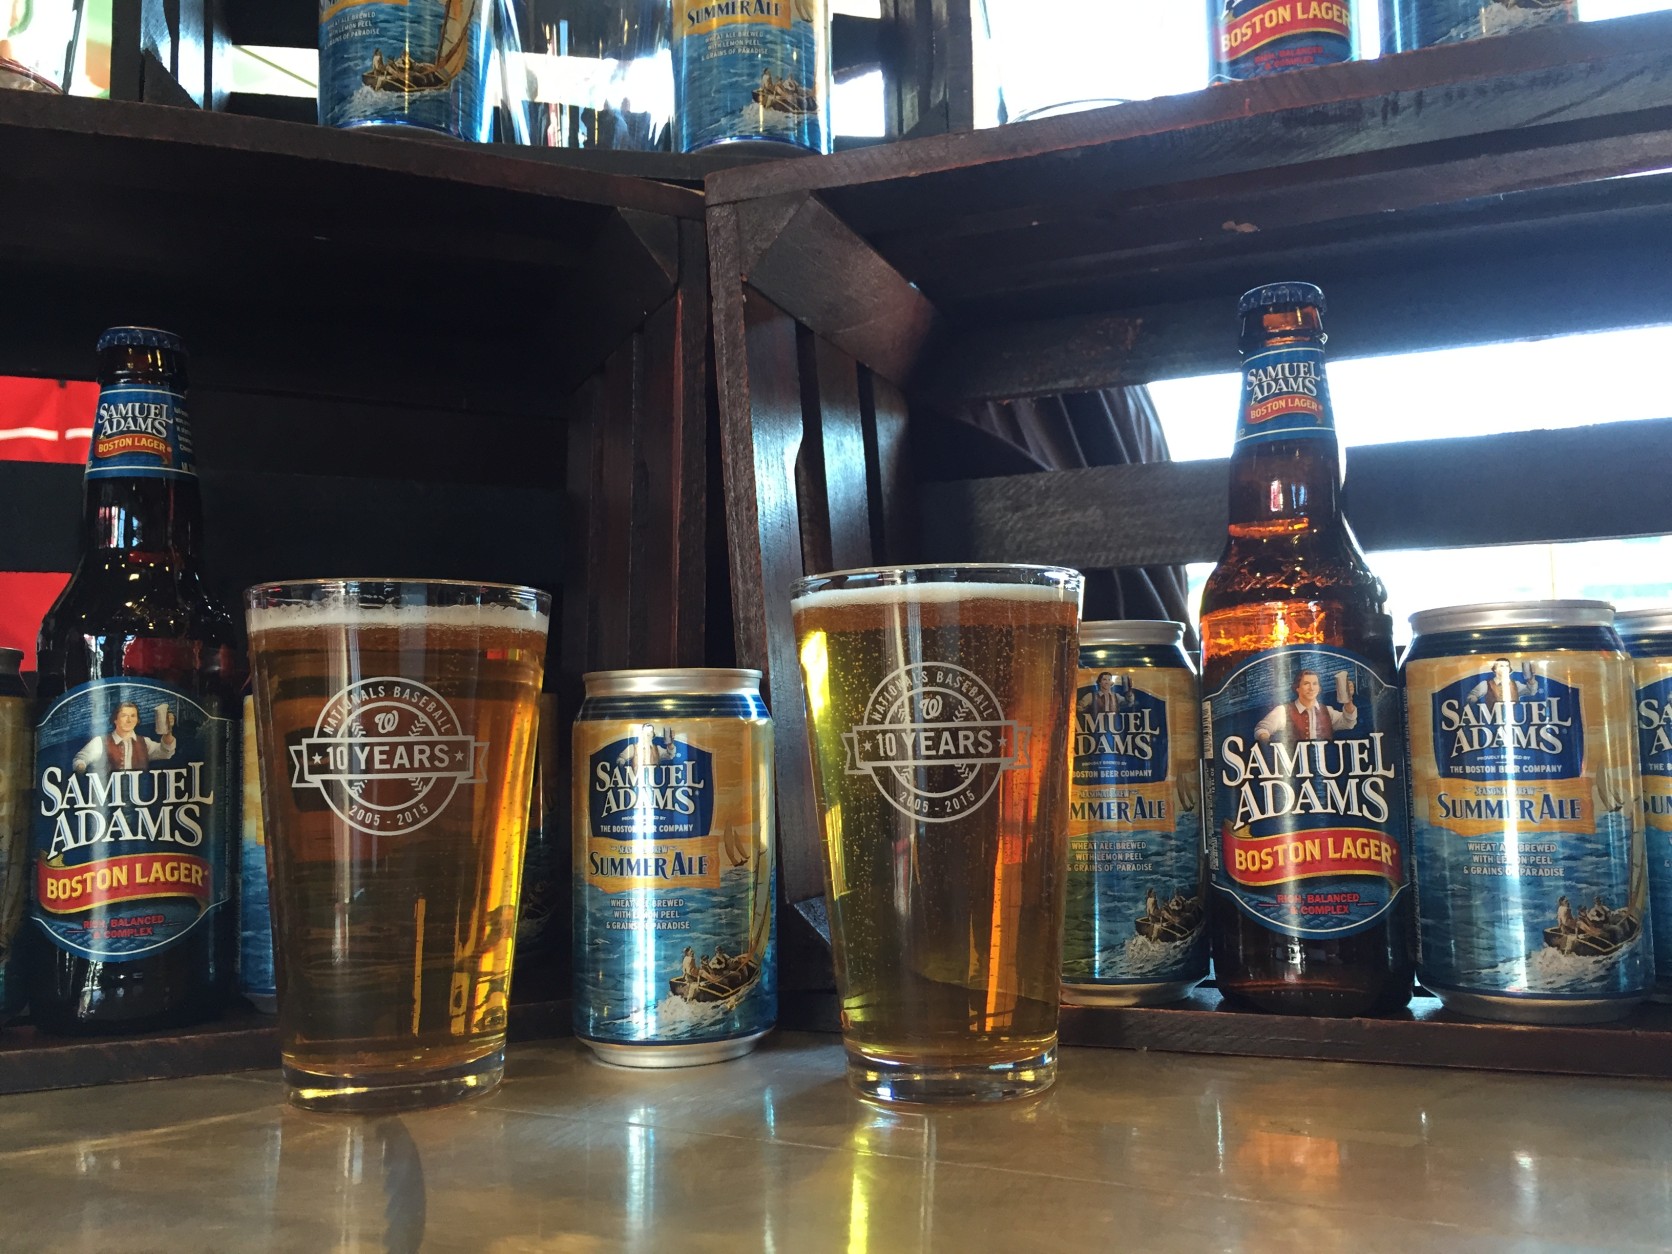 Sam Adams has brewed a special IPA to commemorate the team's 10th anniversary in Washington. (WTOP/Andrew Mollenbeck)